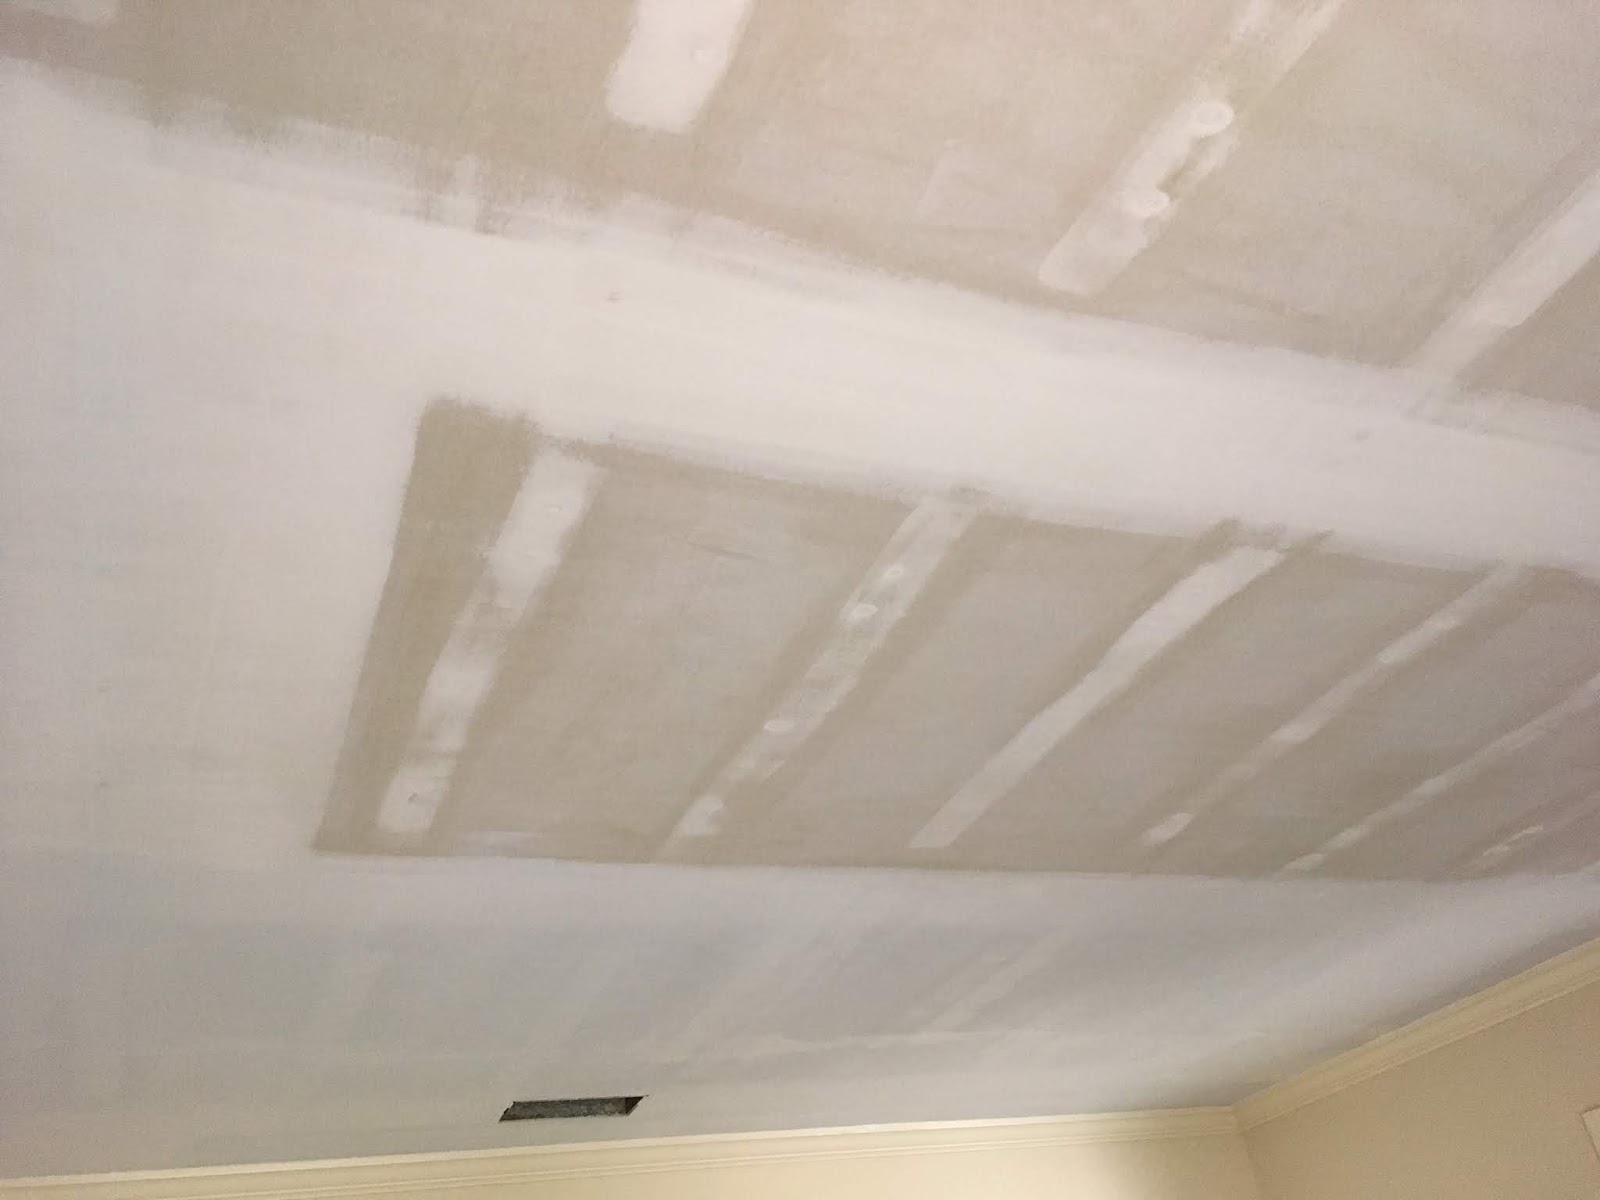 Finishing Ceilings After Popcorn Removal Bean In Love